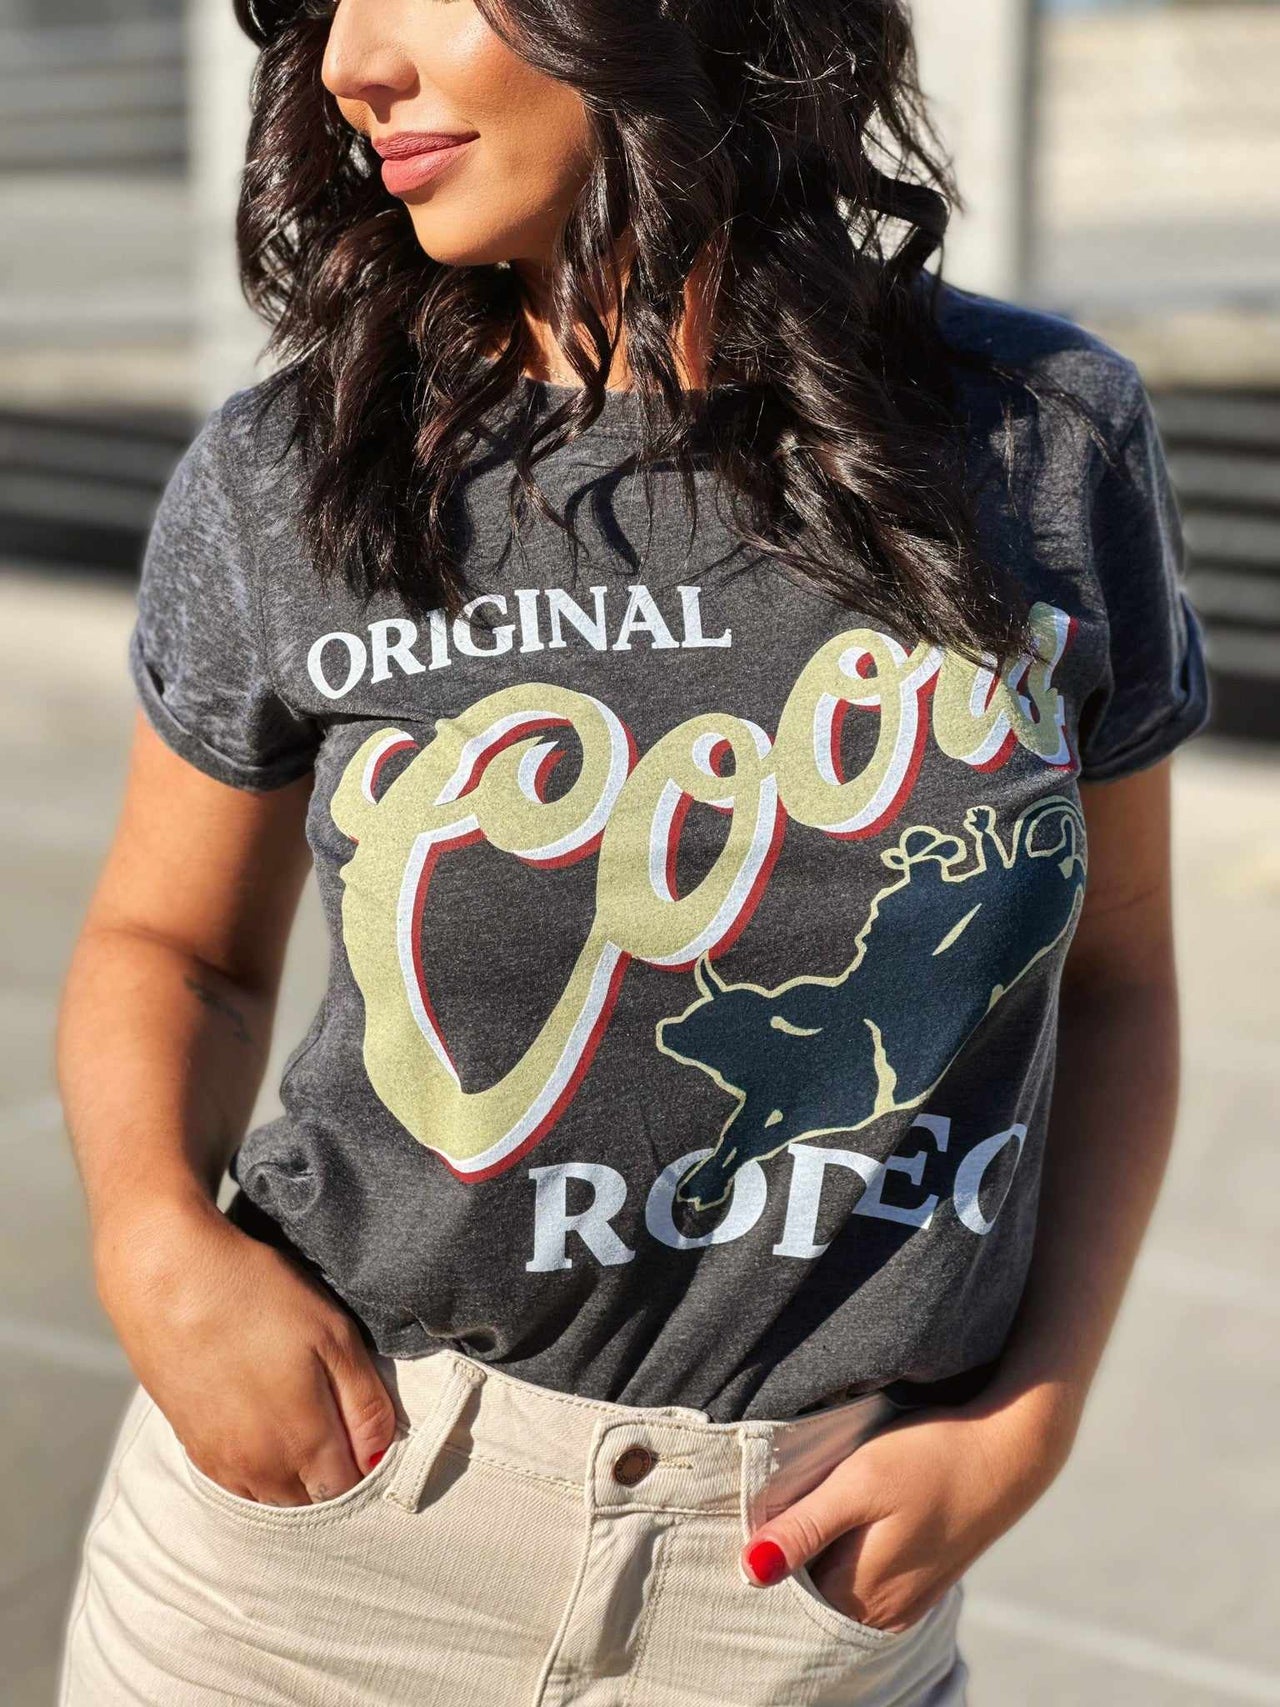 Original Coors rodeo graphic tee